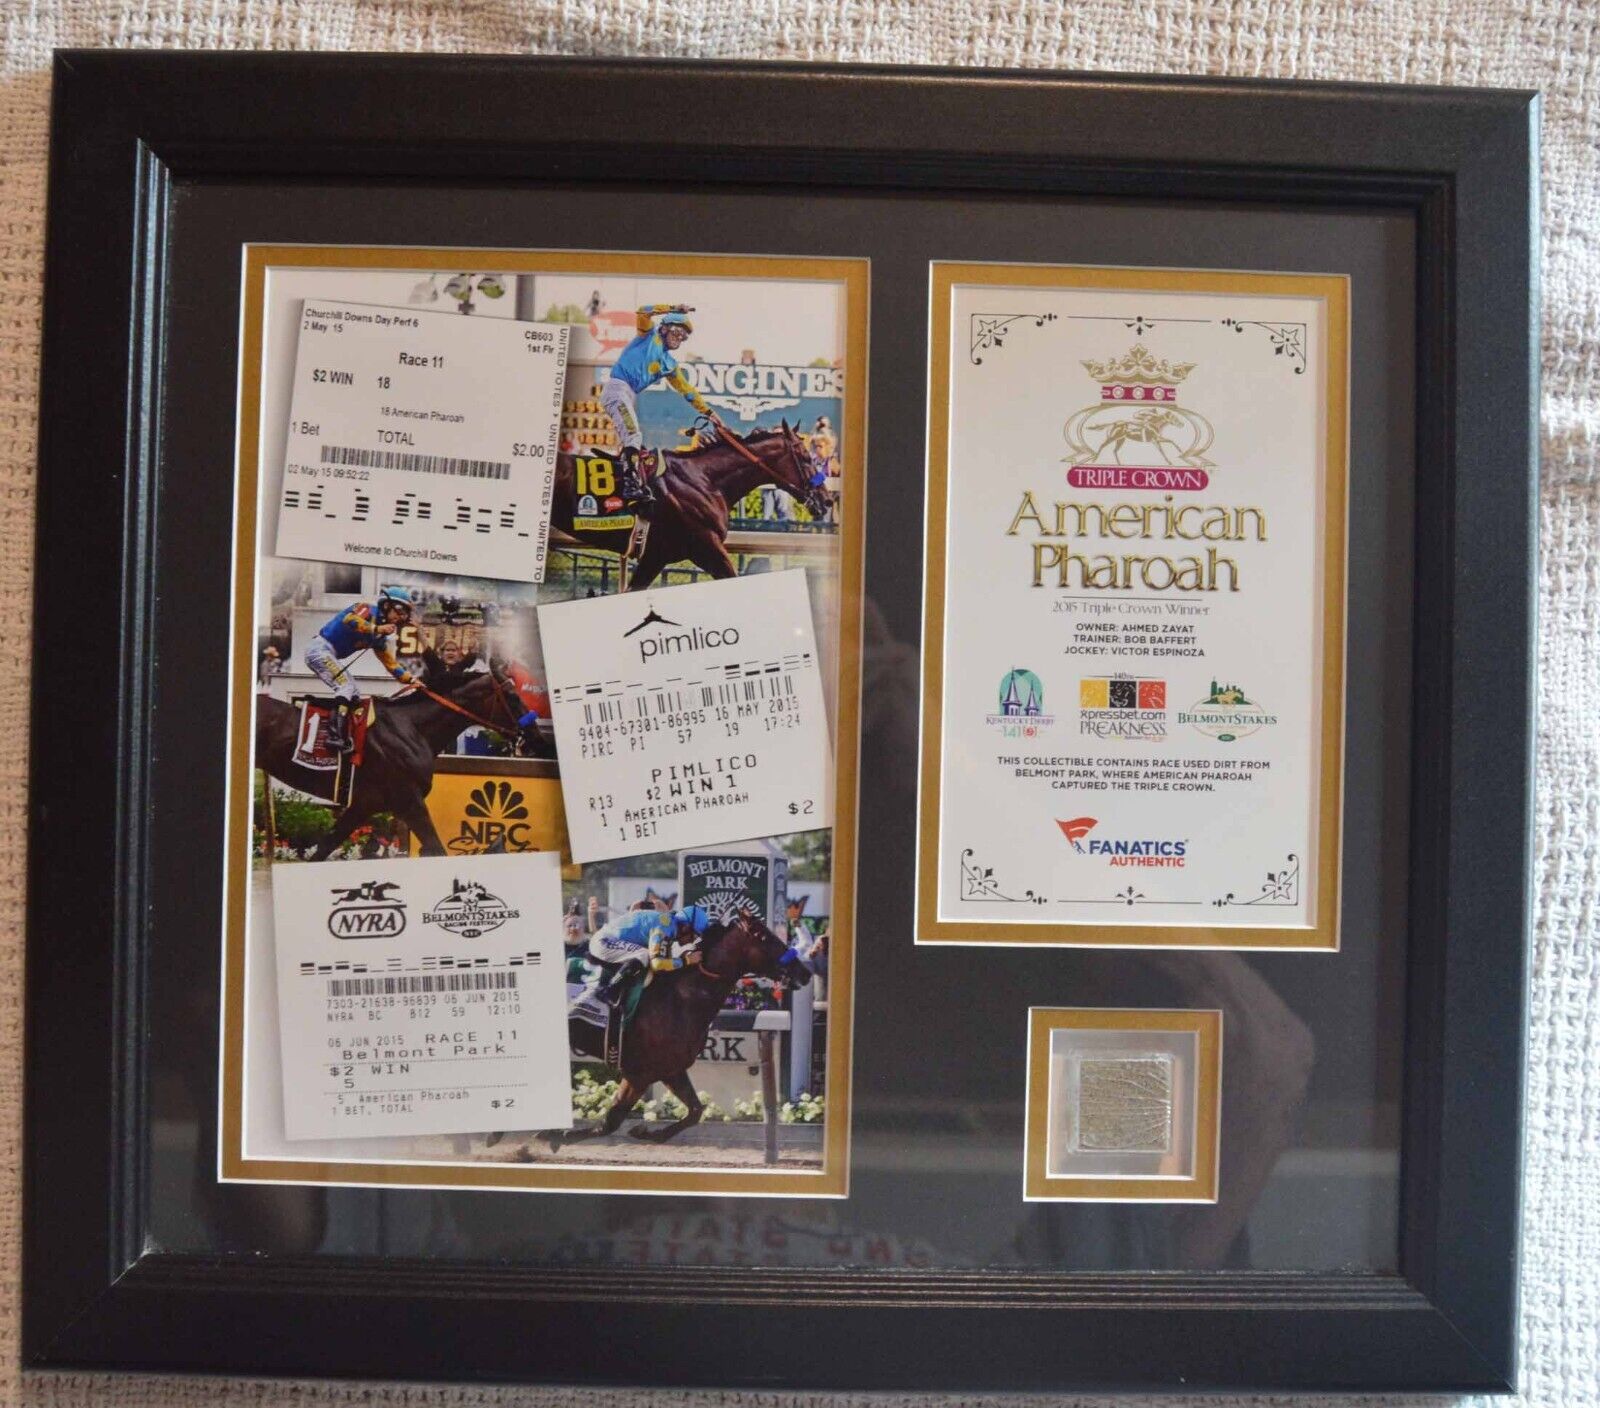 AMERICAN PHAROAH TRIPLE CROWN WIN-AUTHENTIC RACE DIRT IN FRAMED COLLAGE with/COA